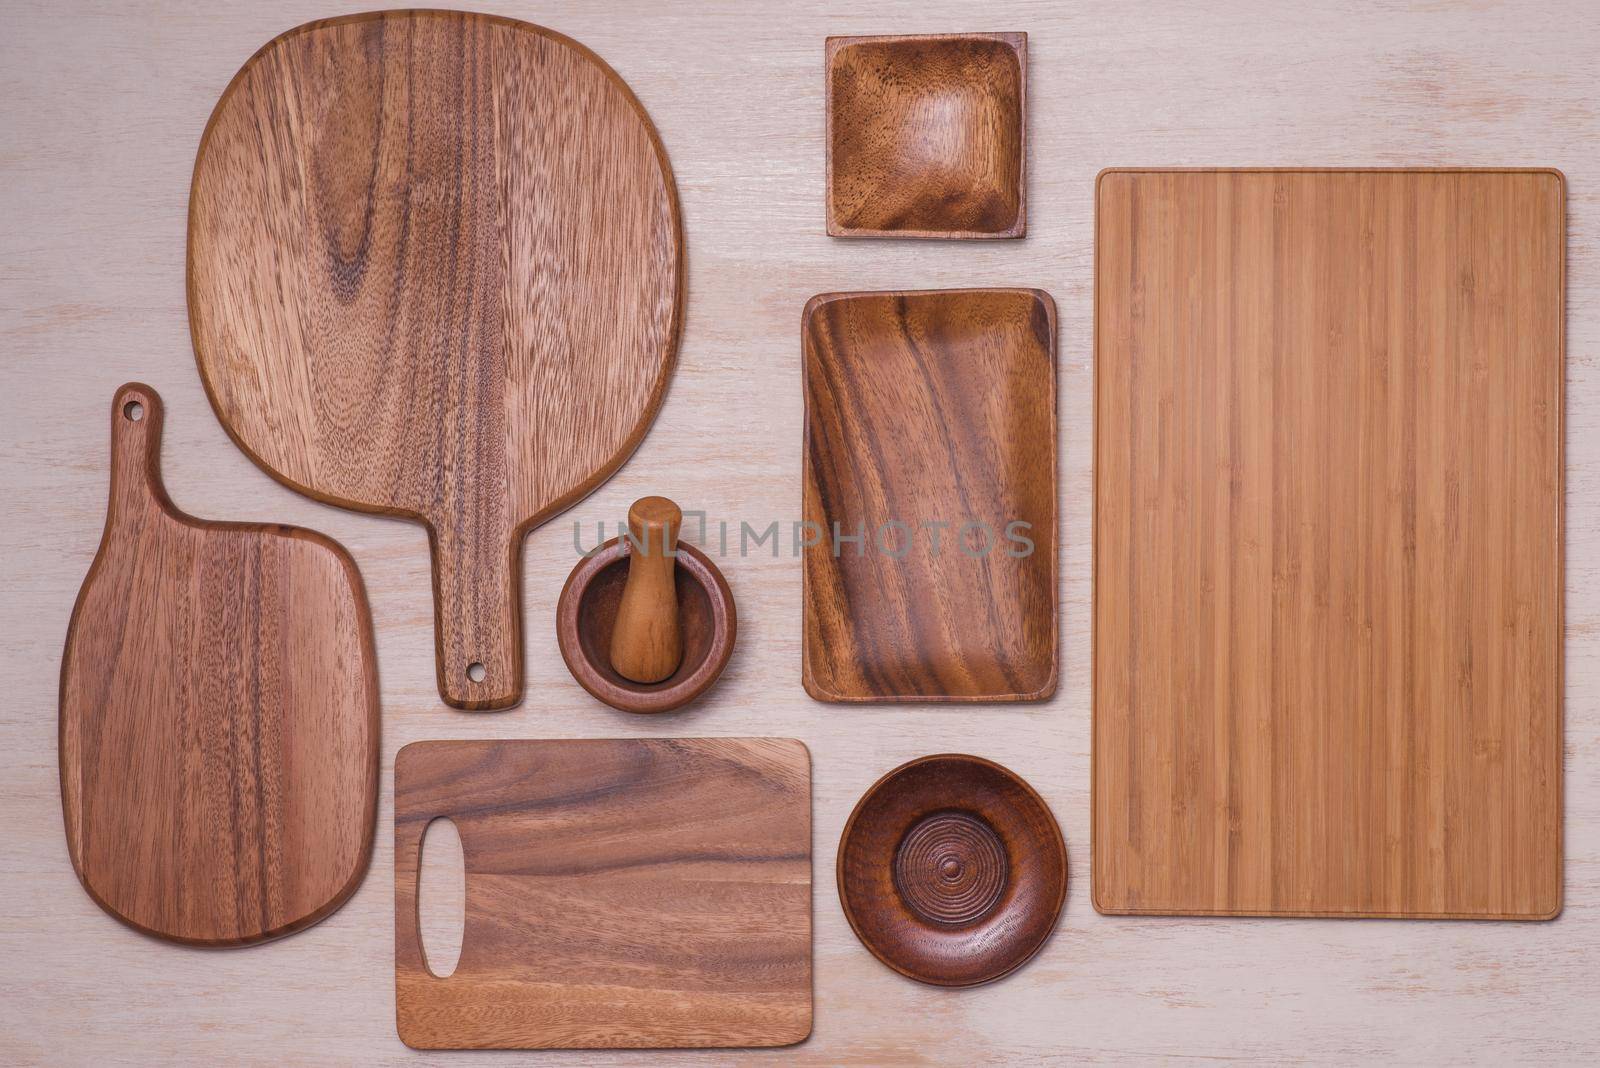 Overhead view of wood utensils, Flat lay photography of wood kitchenware